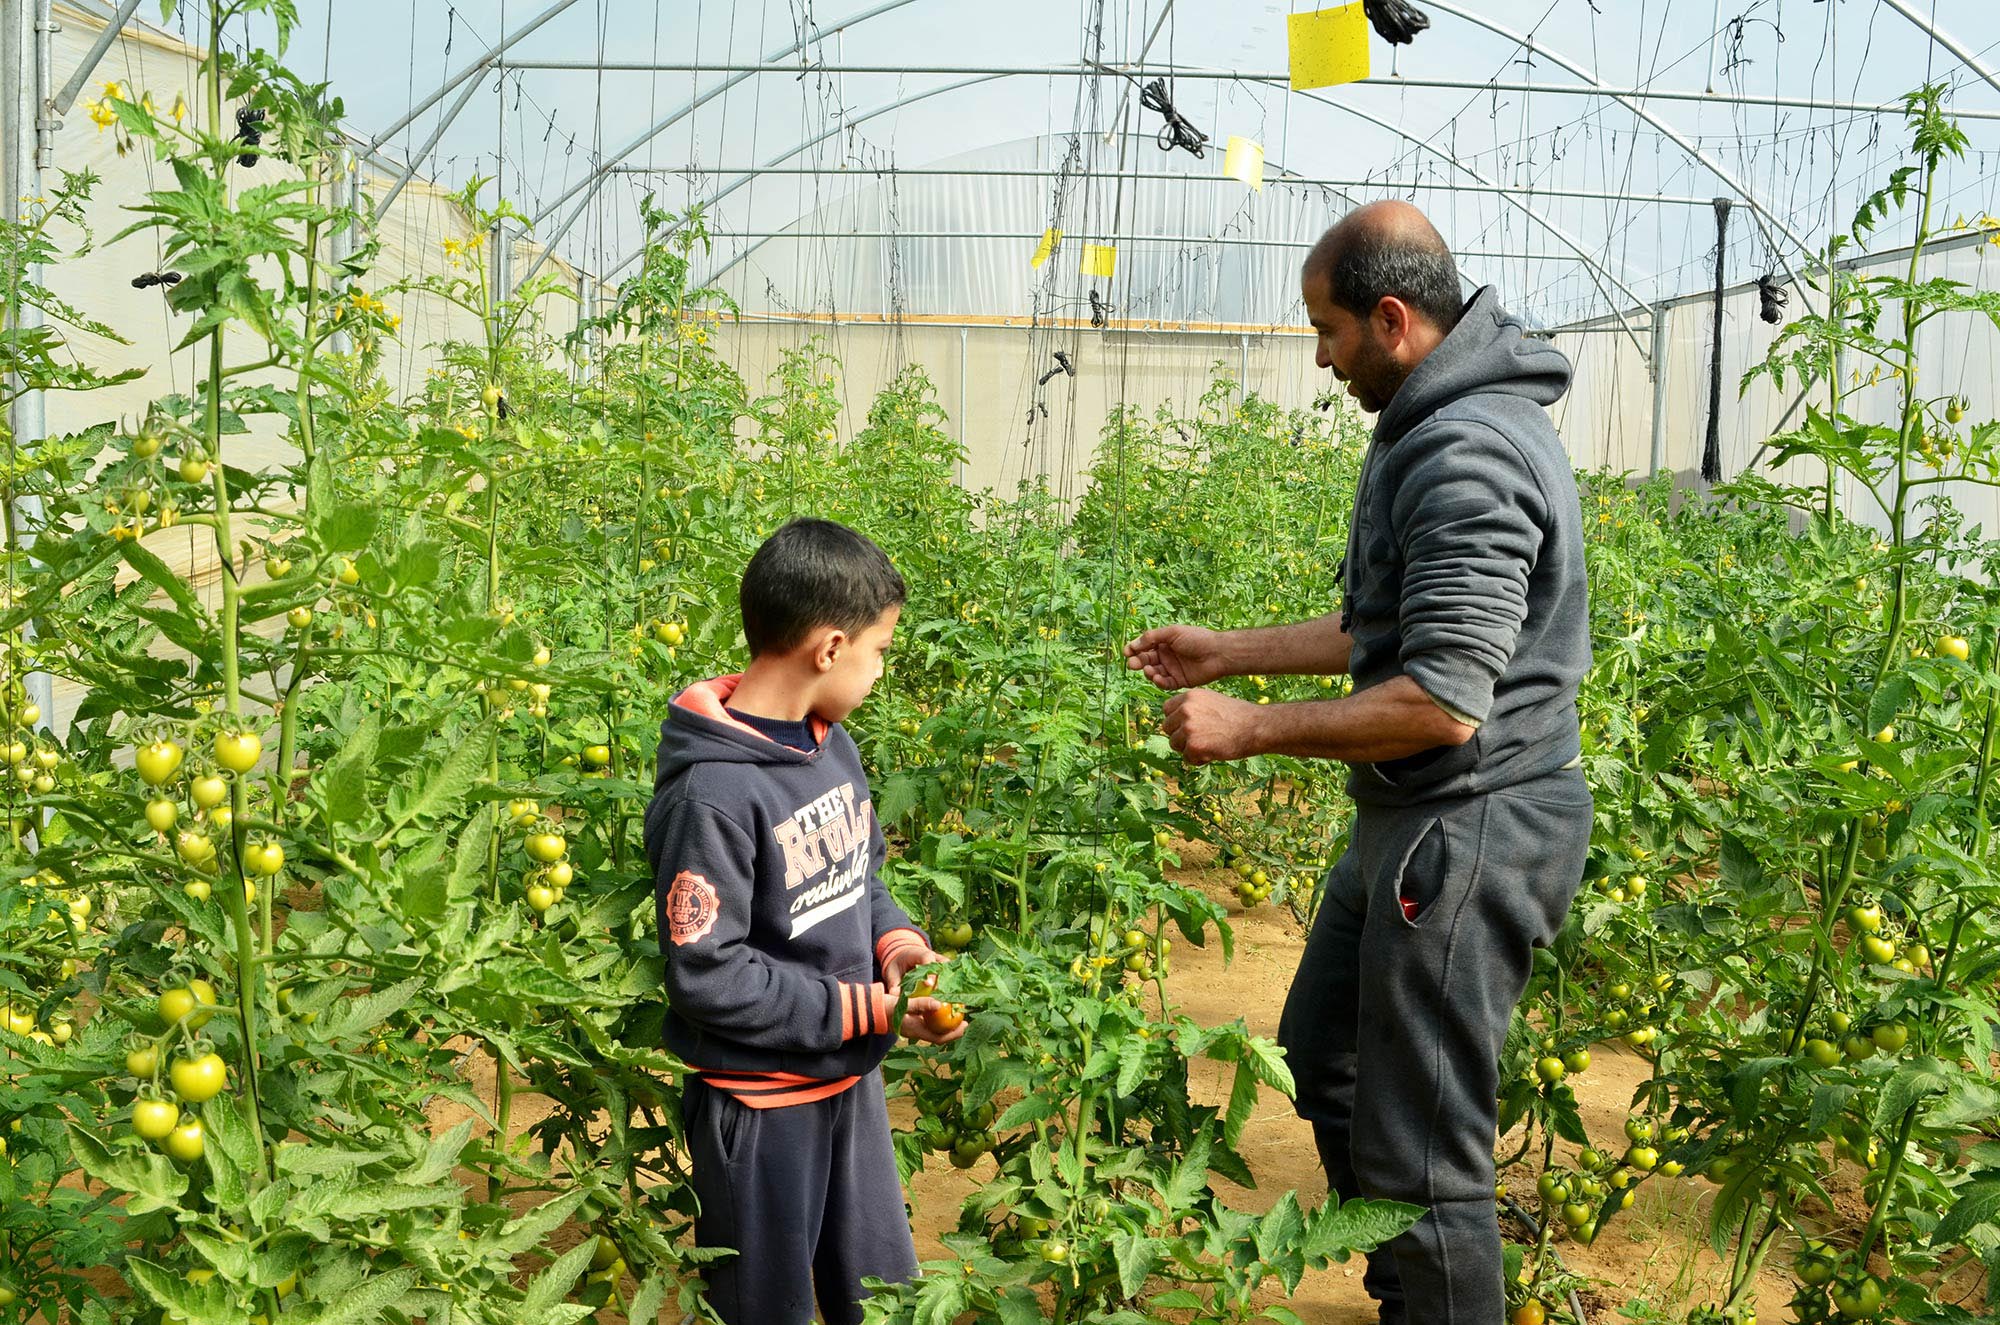 Gaza father shows his son how to tend plants.